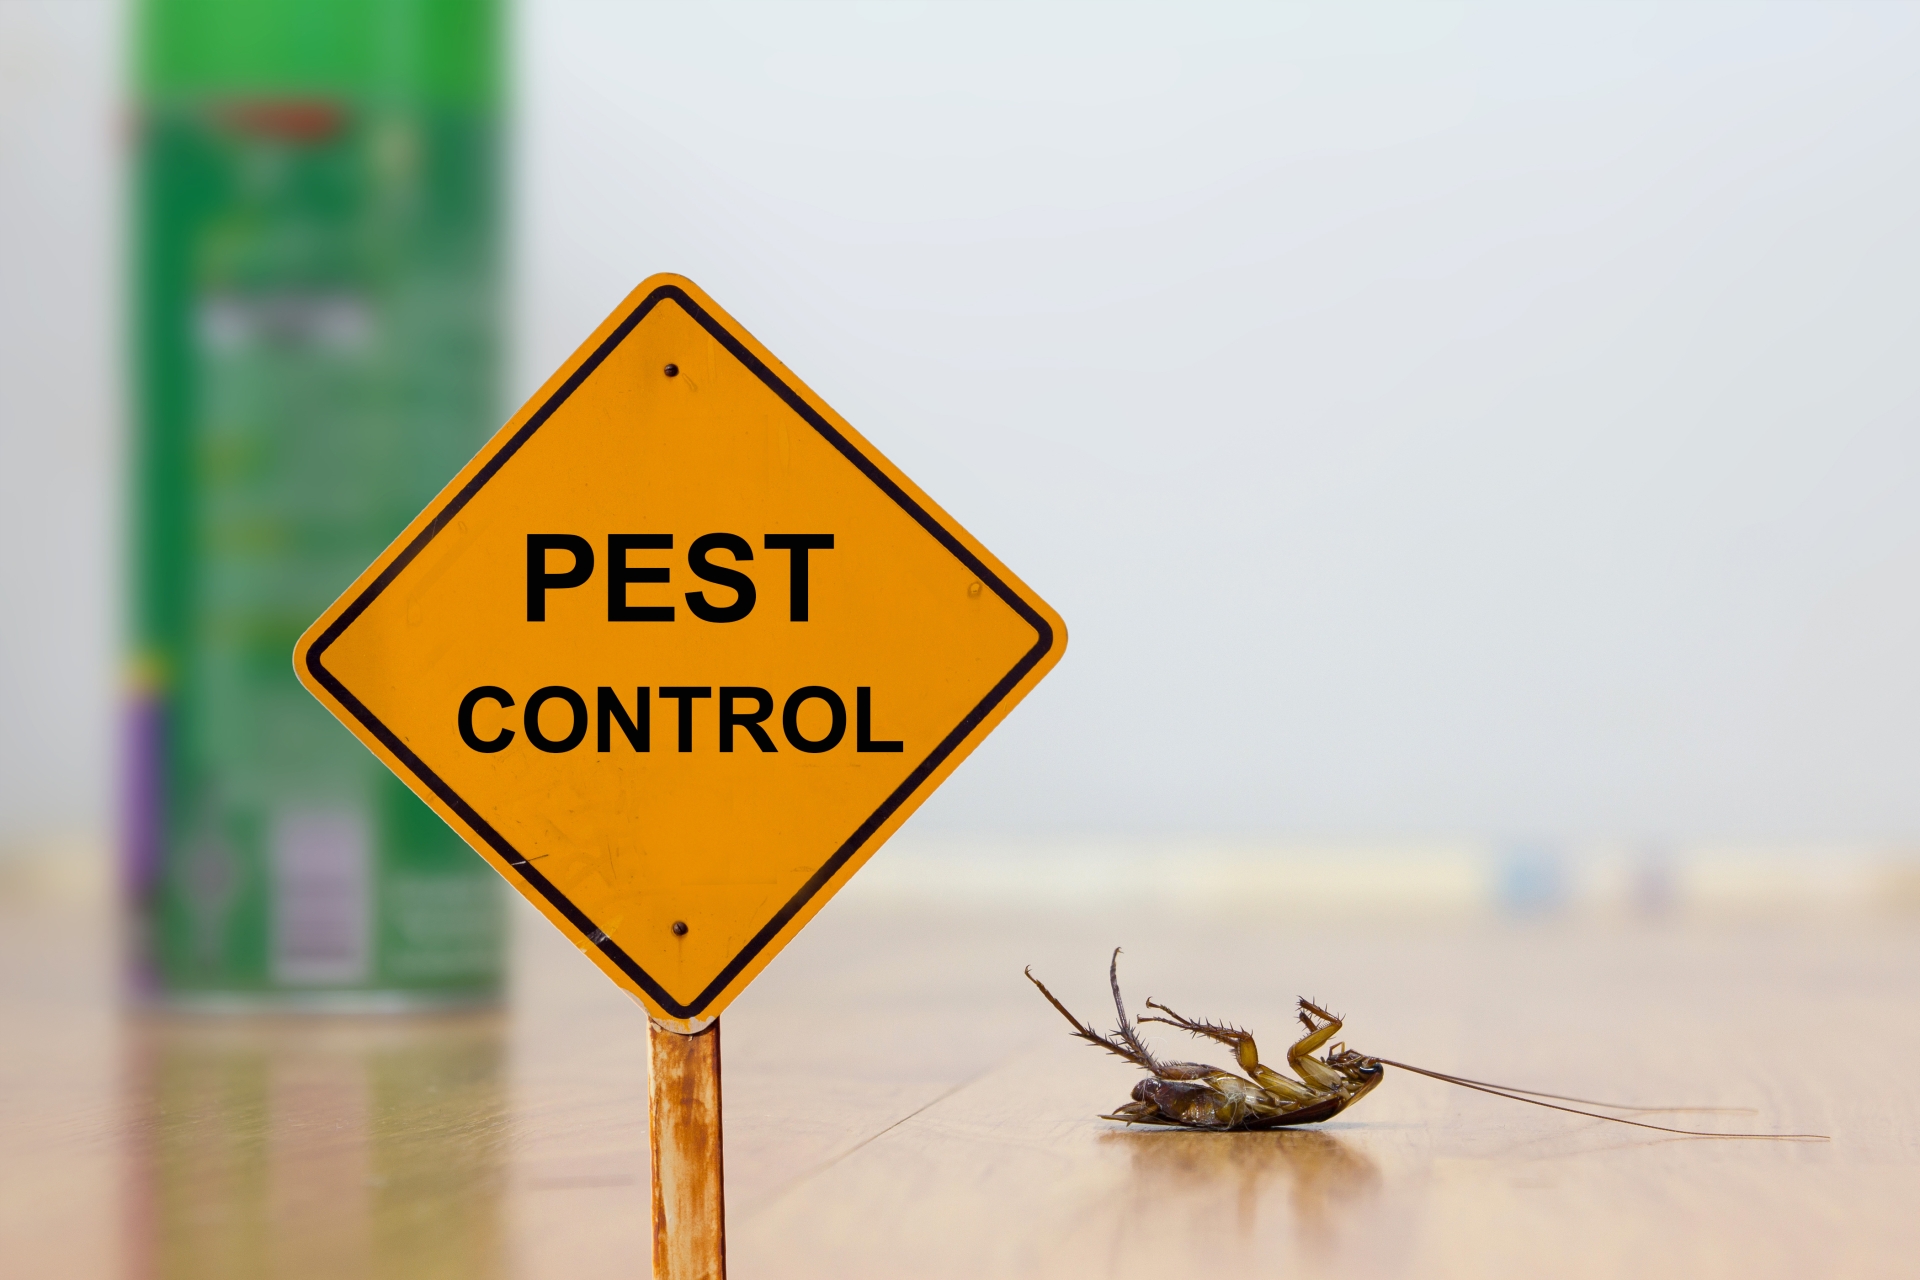 24 Hour Pest Control, Pest Control in Havering-atte-Bower, Abridge, RM4. Call Now 020 8166 9746